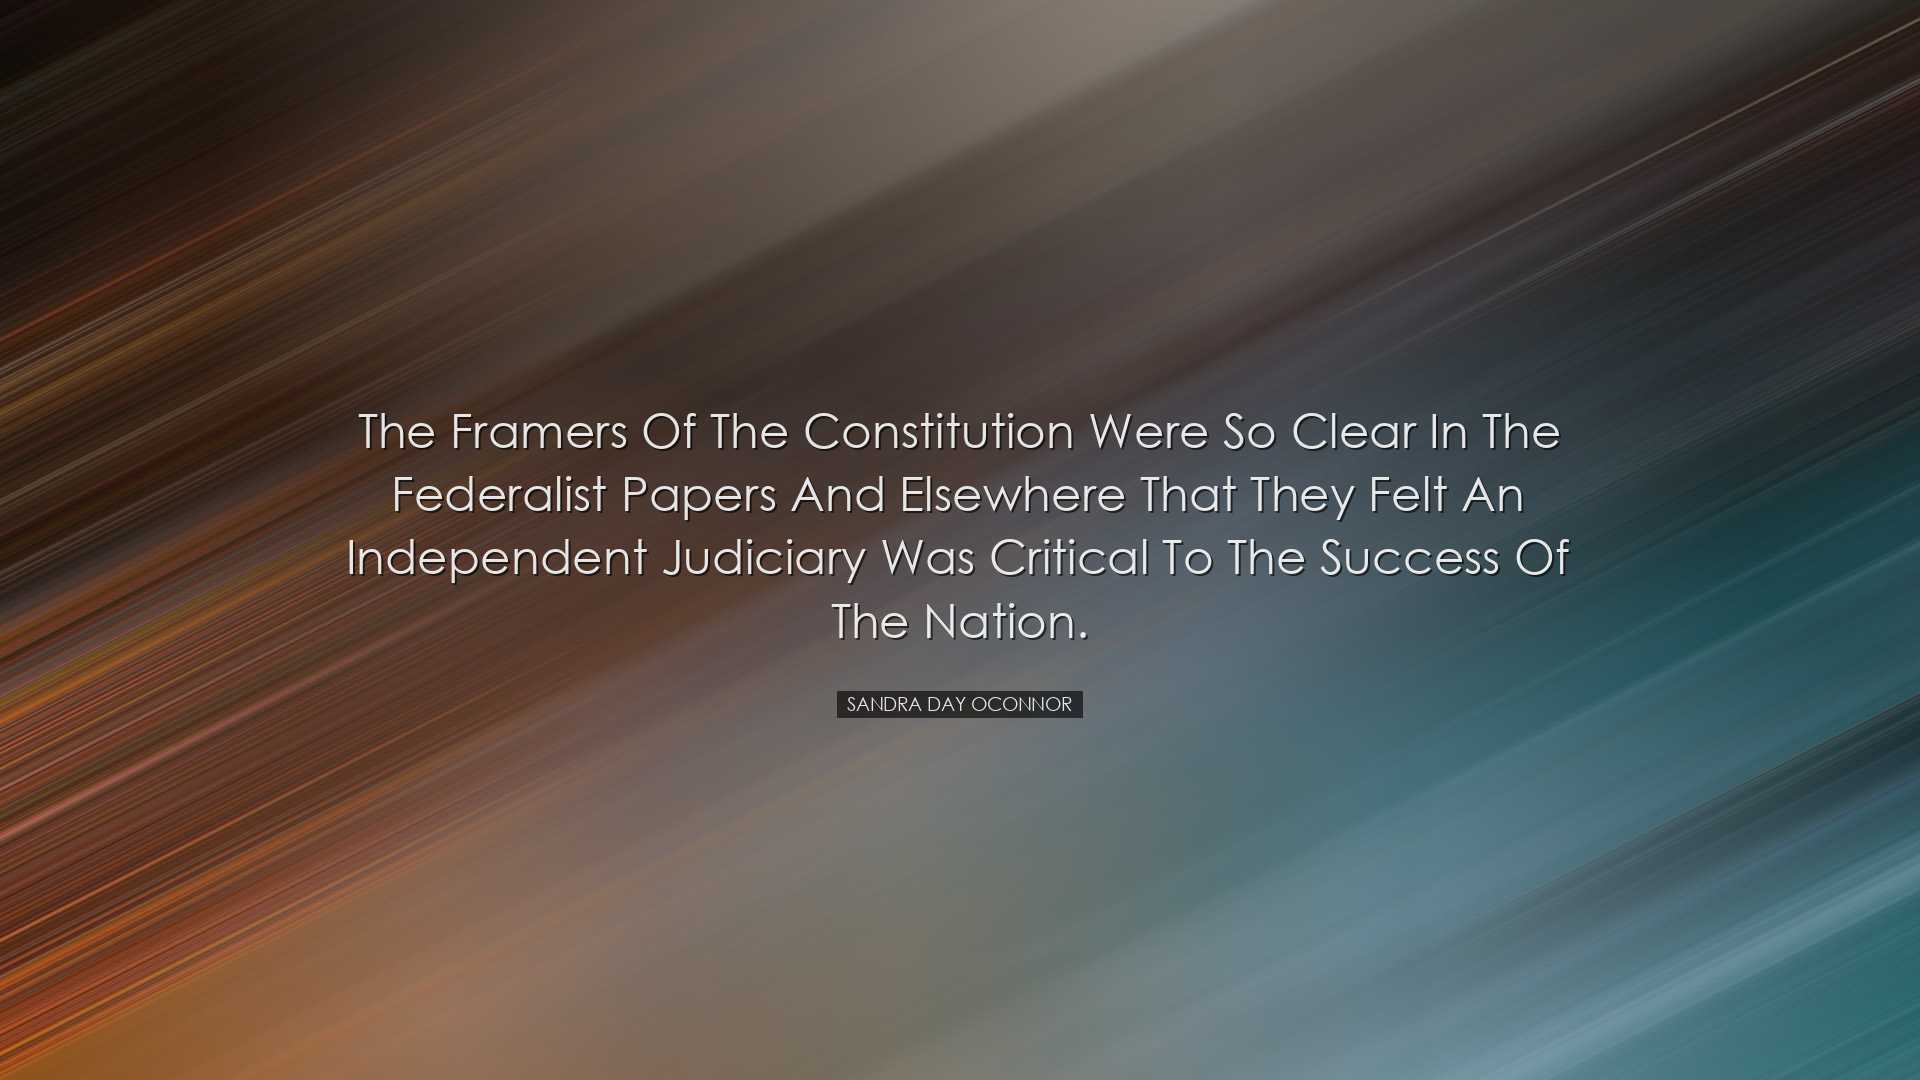 The framers of the Constitution were so clear in the federalist pa